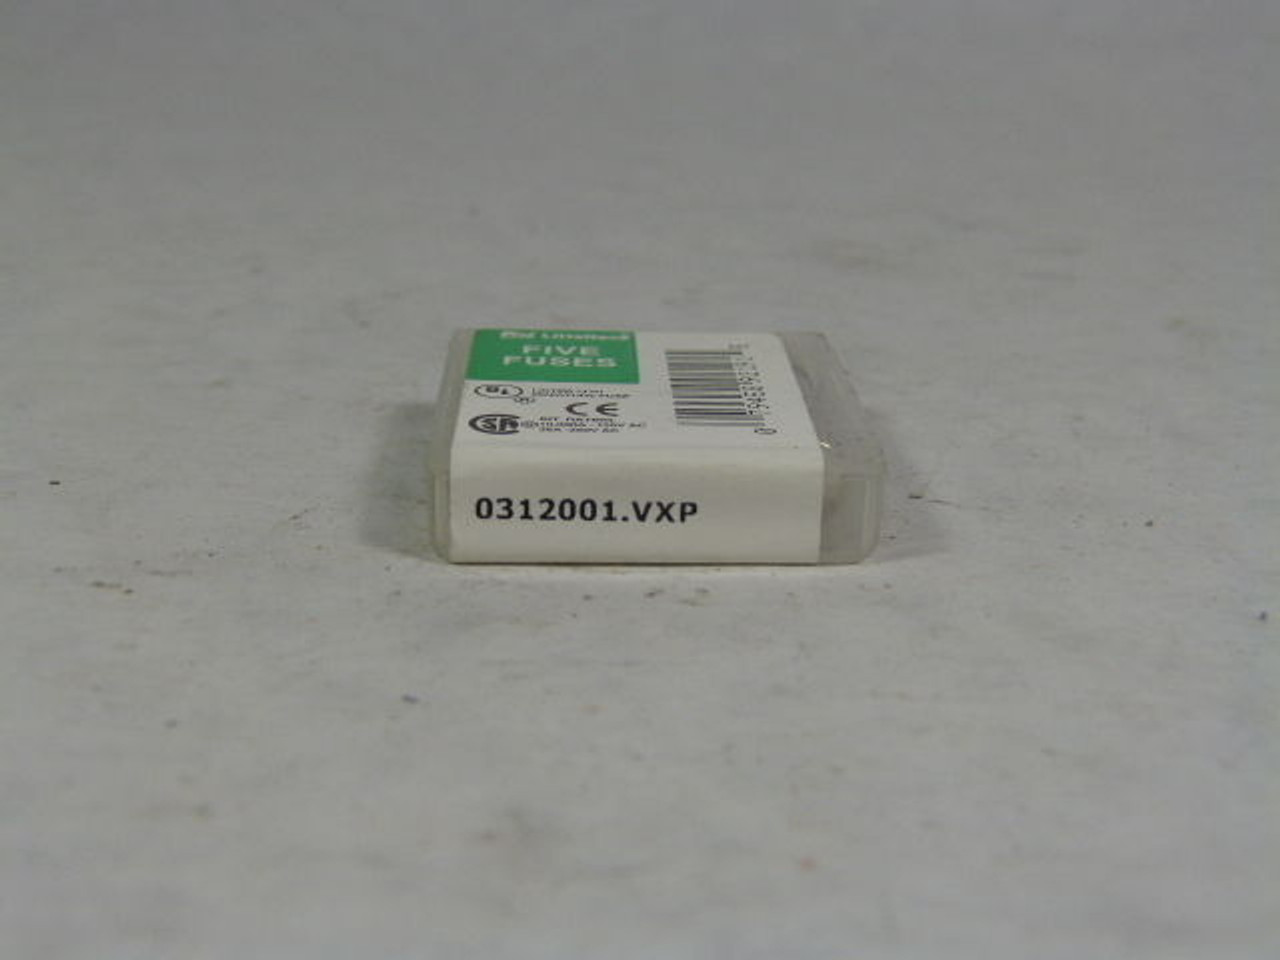 Littelfuse 0312001.vxp Fast Acting Fuse 35A 250V 5-Pack ! NEW !